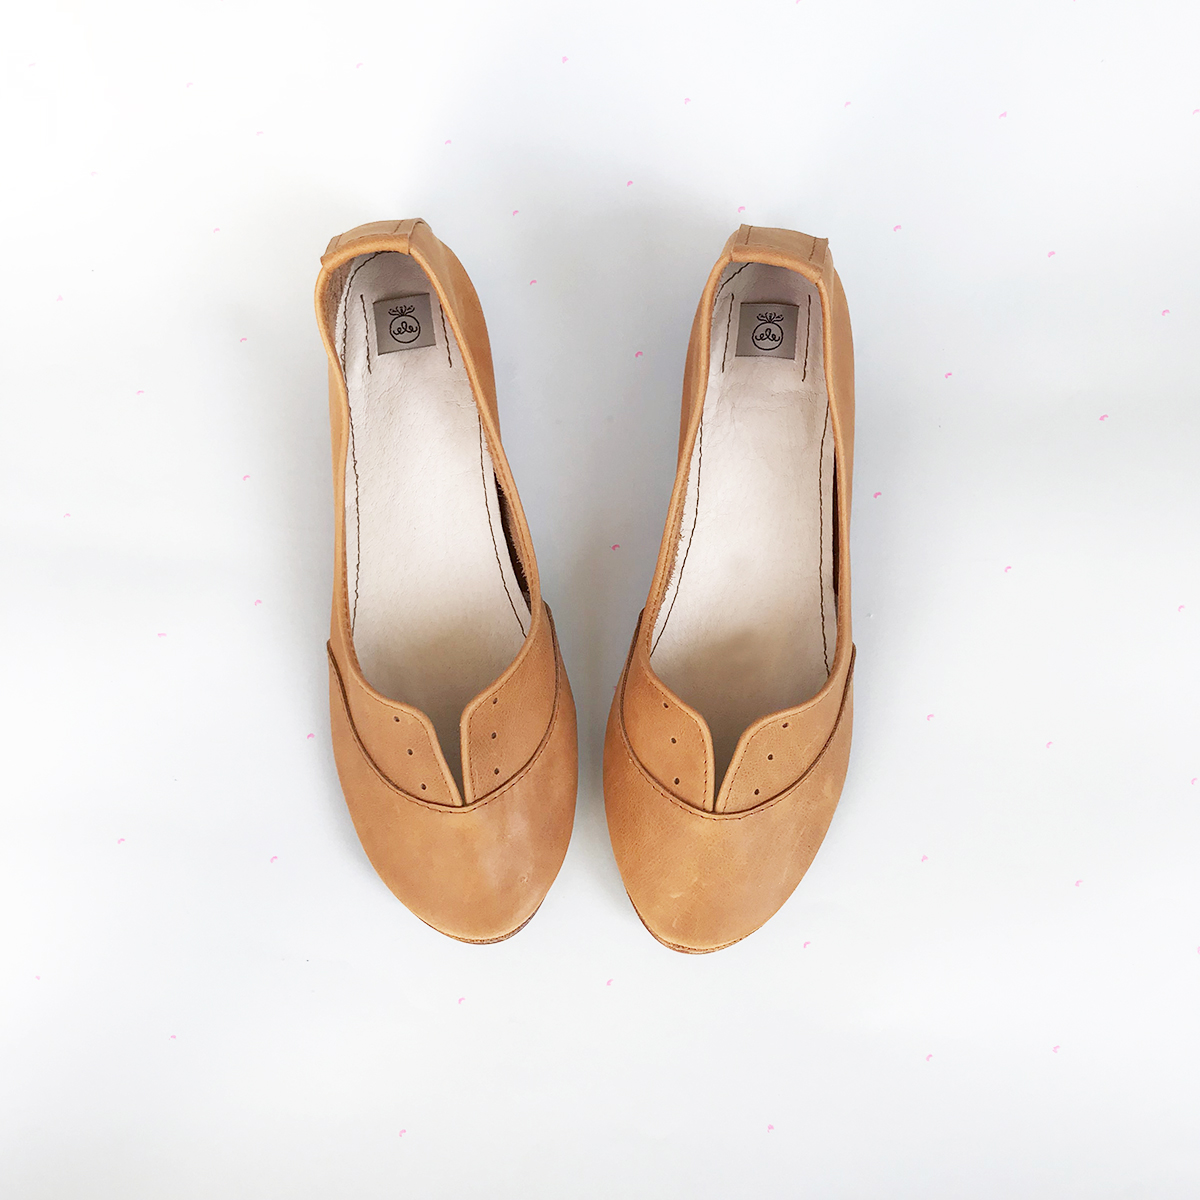 Oxfords Shoes in Tan Leather — Ele Handmade Shoes